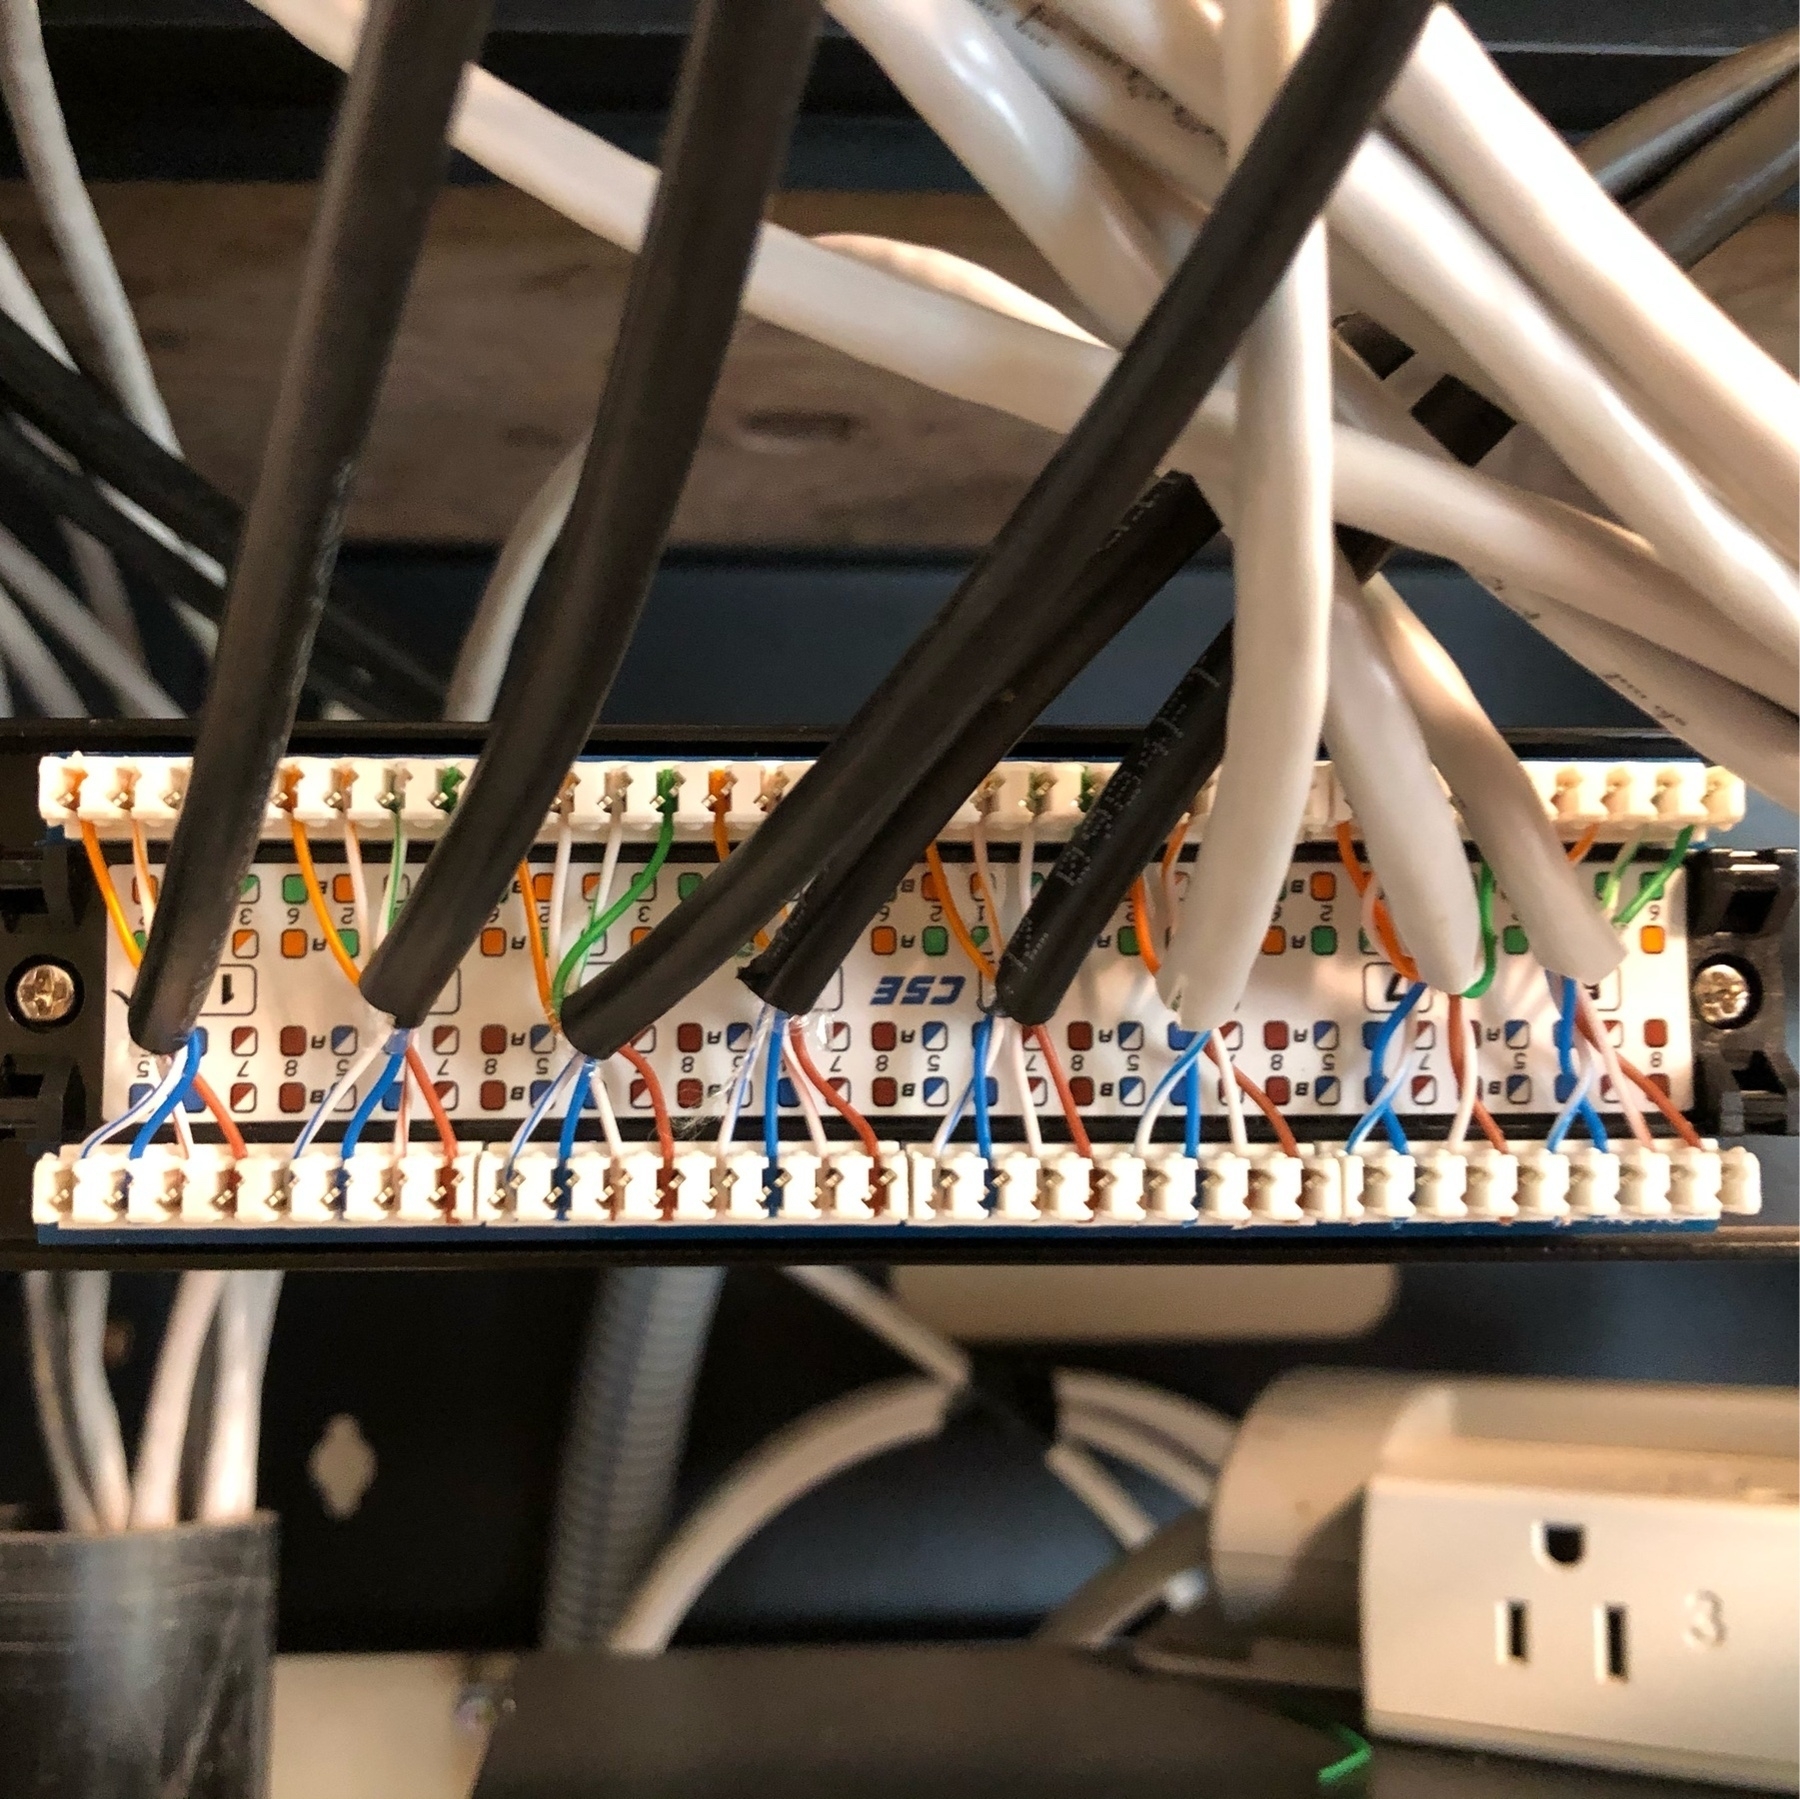 5 black and 3 white cat5e cables connected to terminals behinds a patch panel